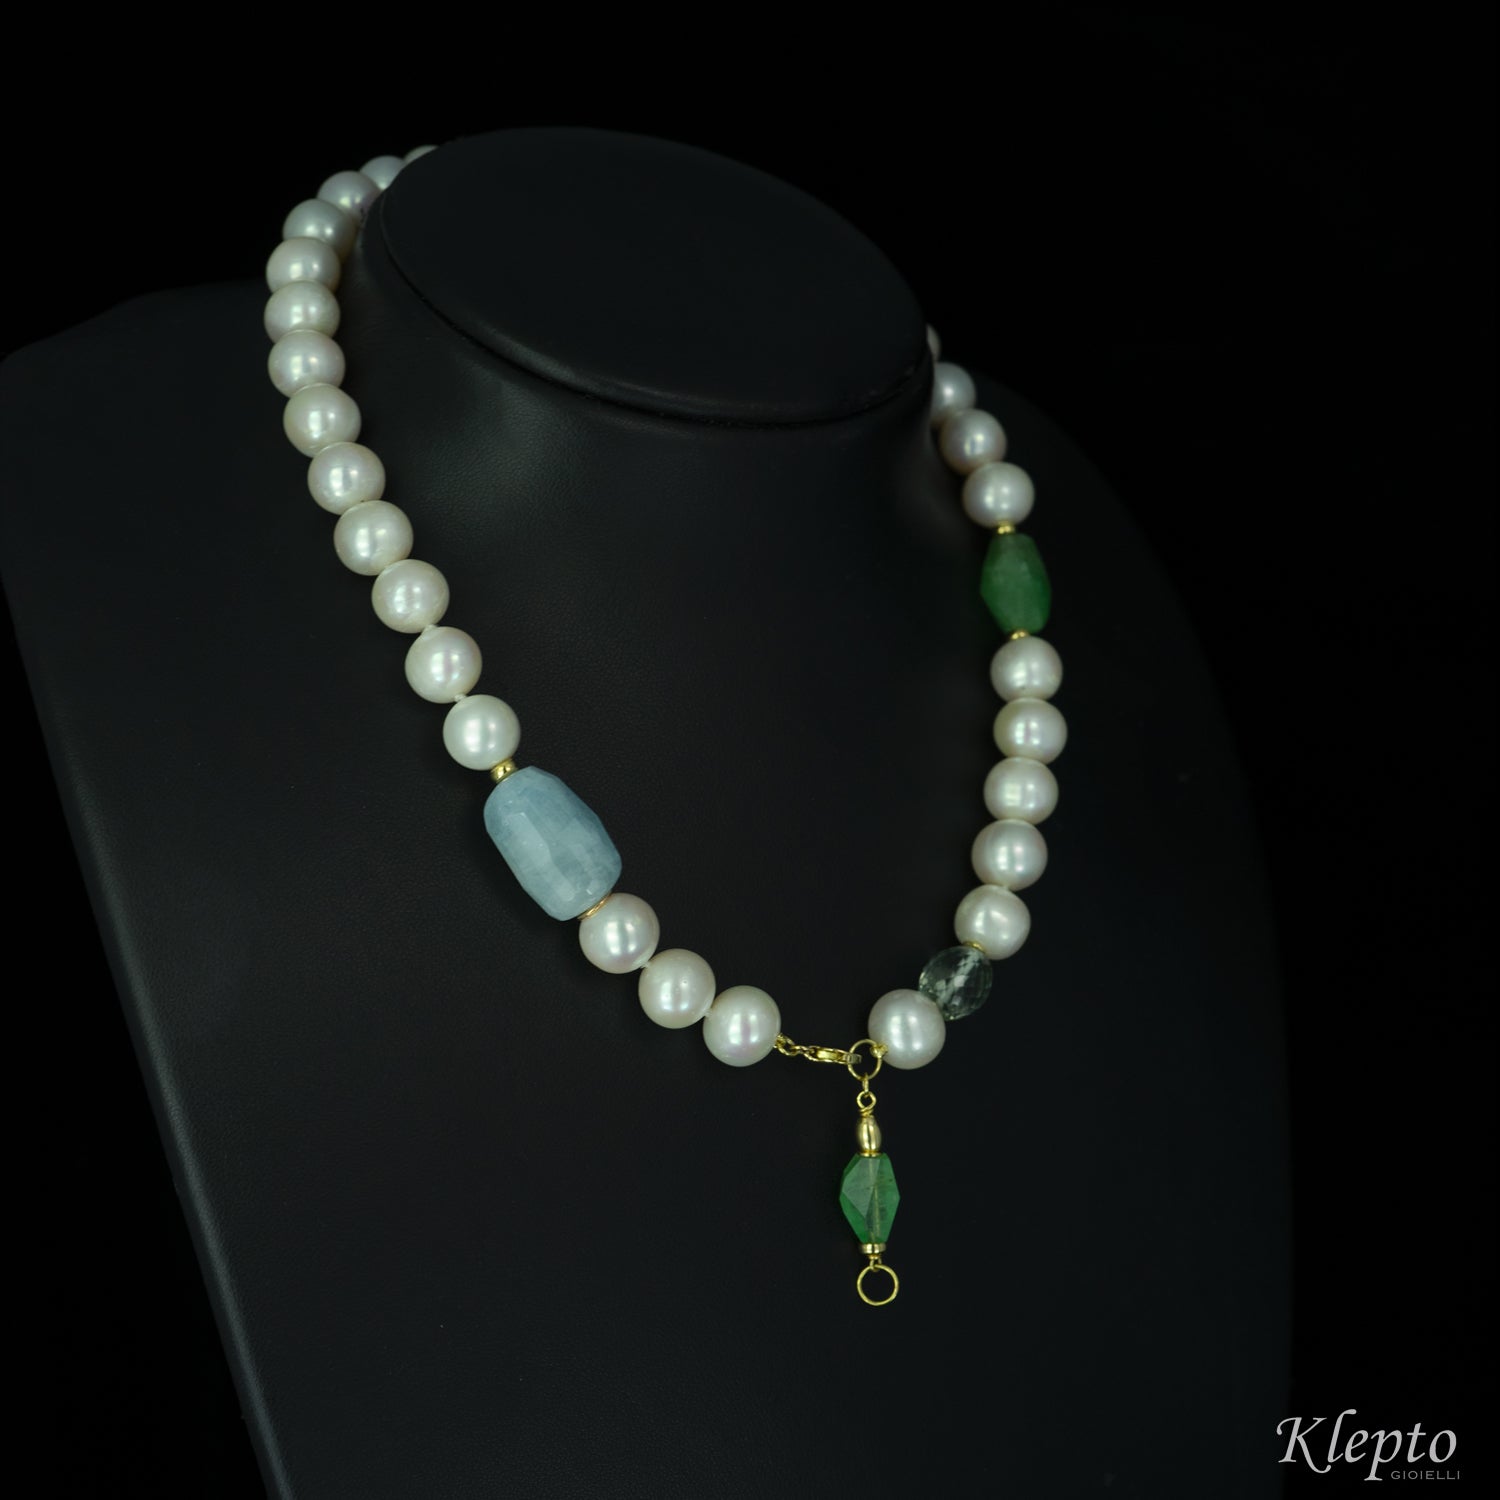 Gold necklace with Pearls, Aquamarine and Emerald